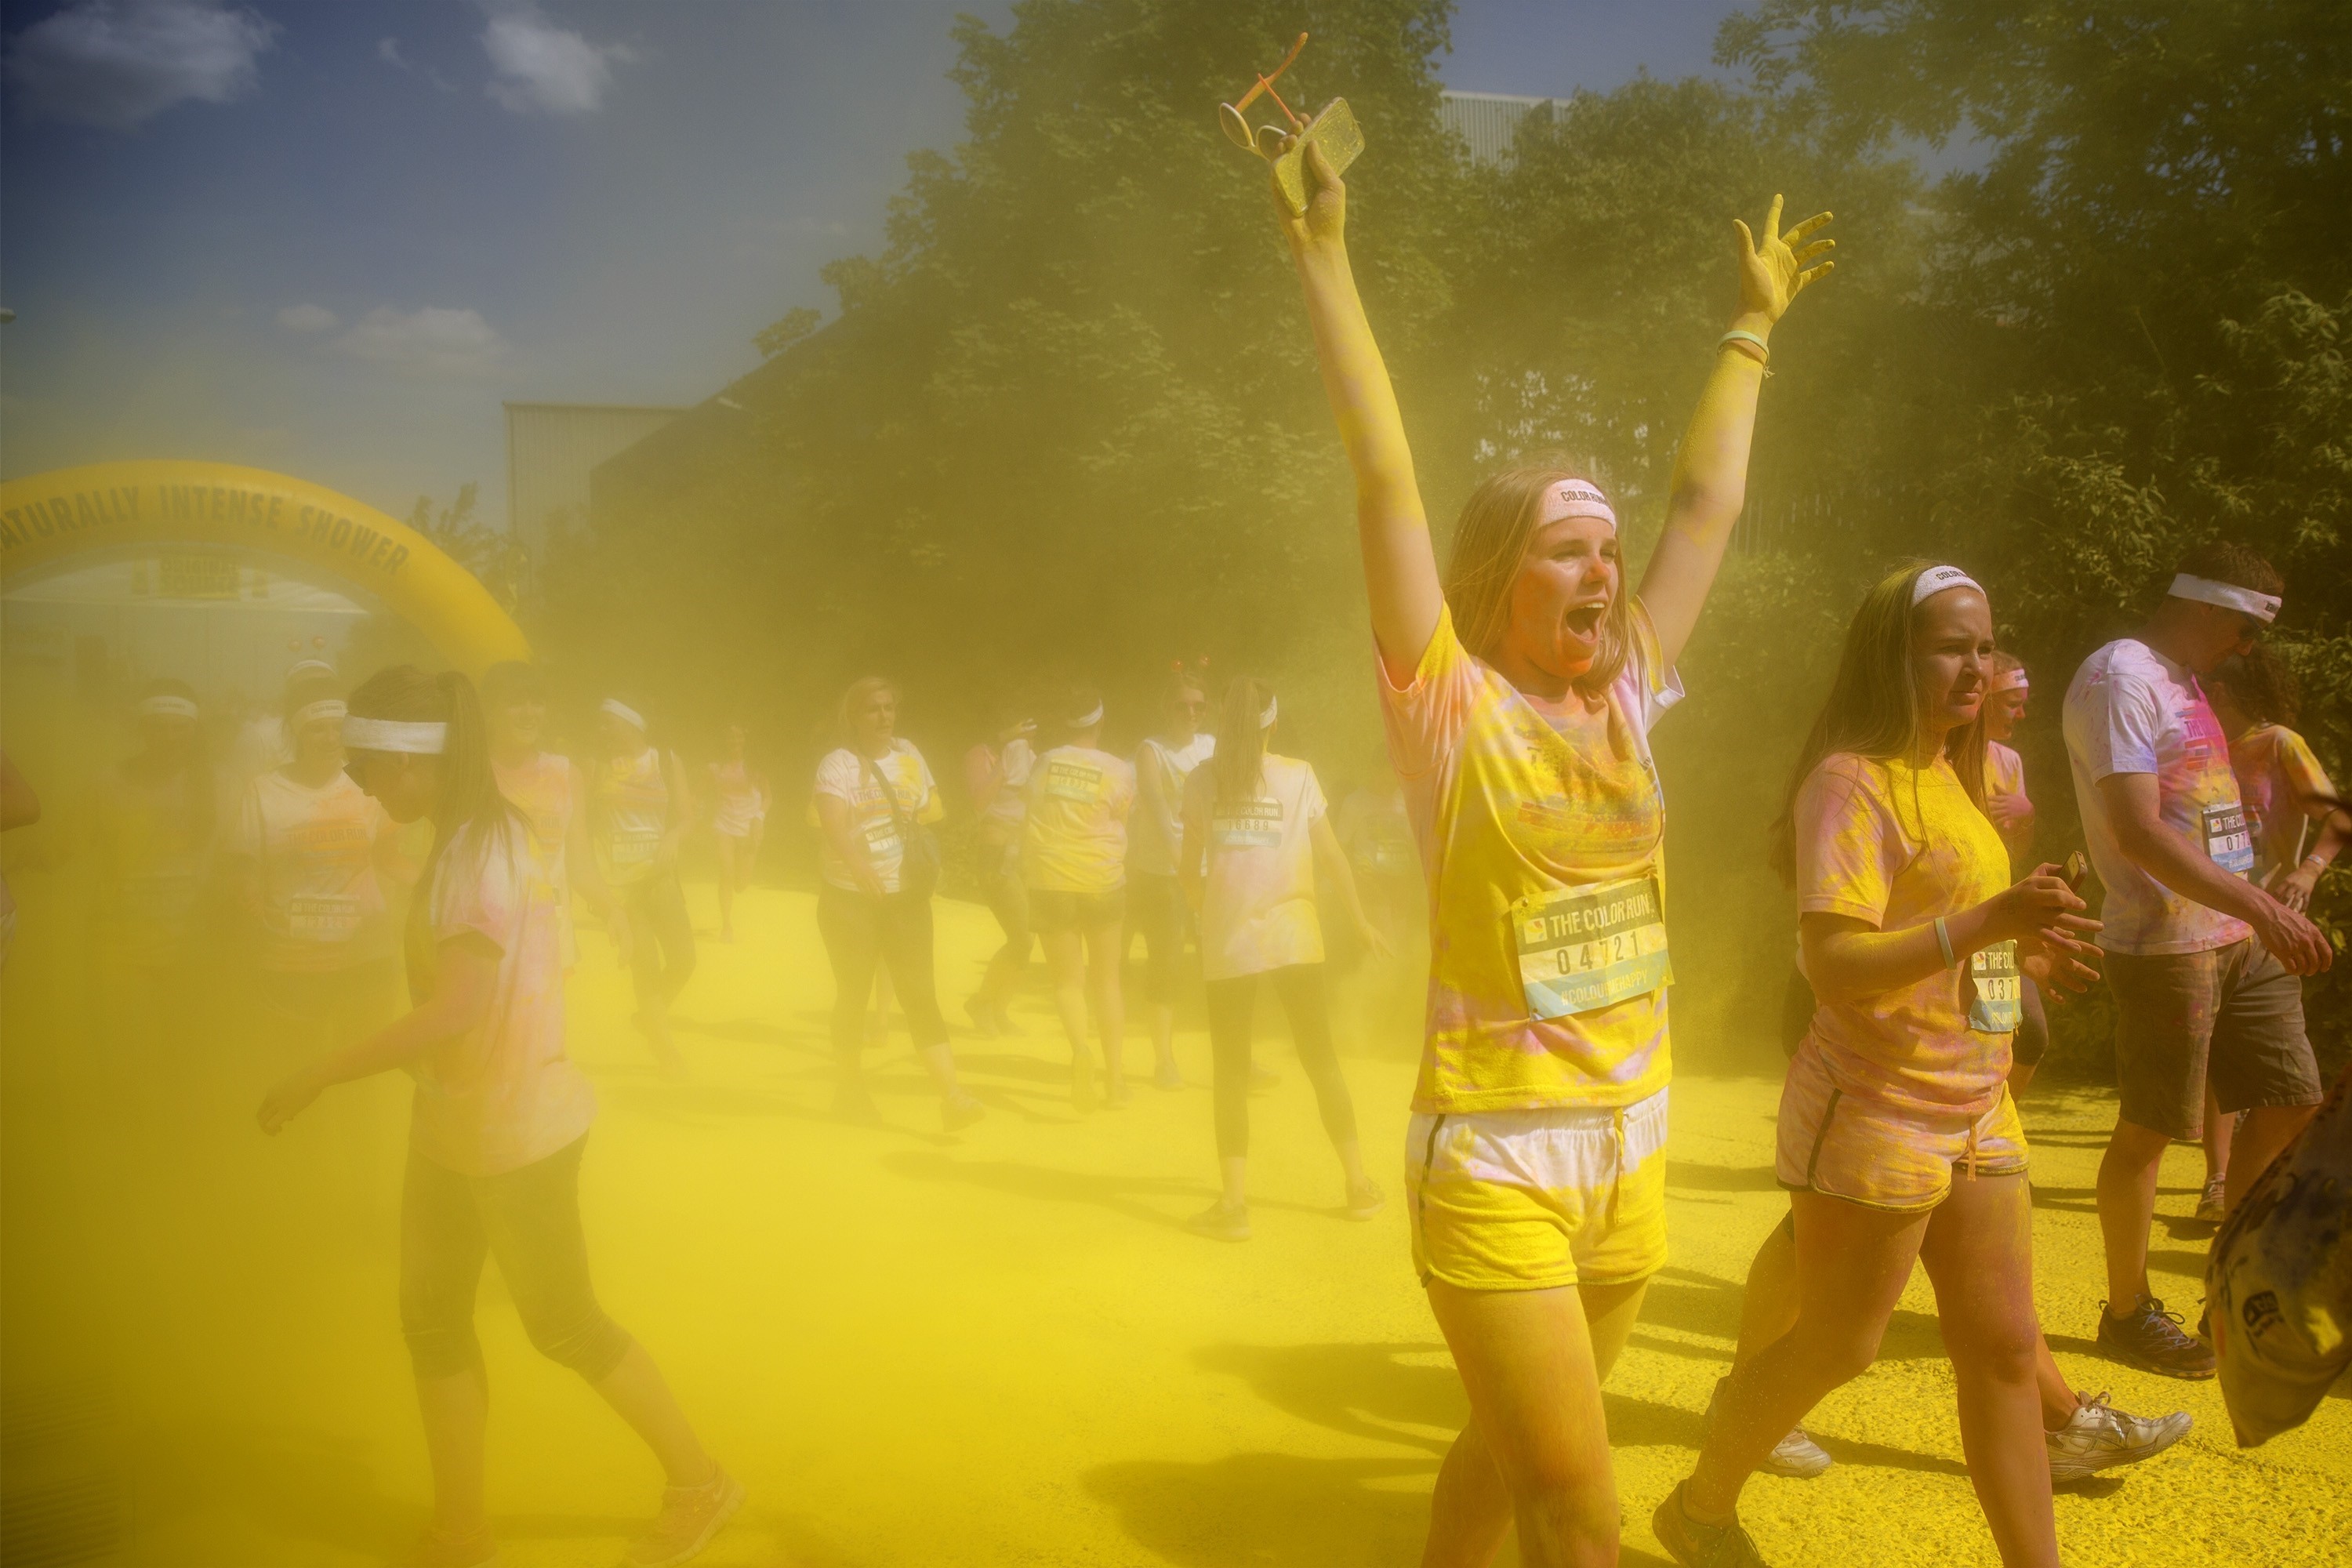 London, June 7, 2015: Runners take part in the Color Run around Wembley Stadium in London—Photo by Tolga Akmen/Anadolu Agency/Getty Images (Getty Images—2015 Anadolu Agency)